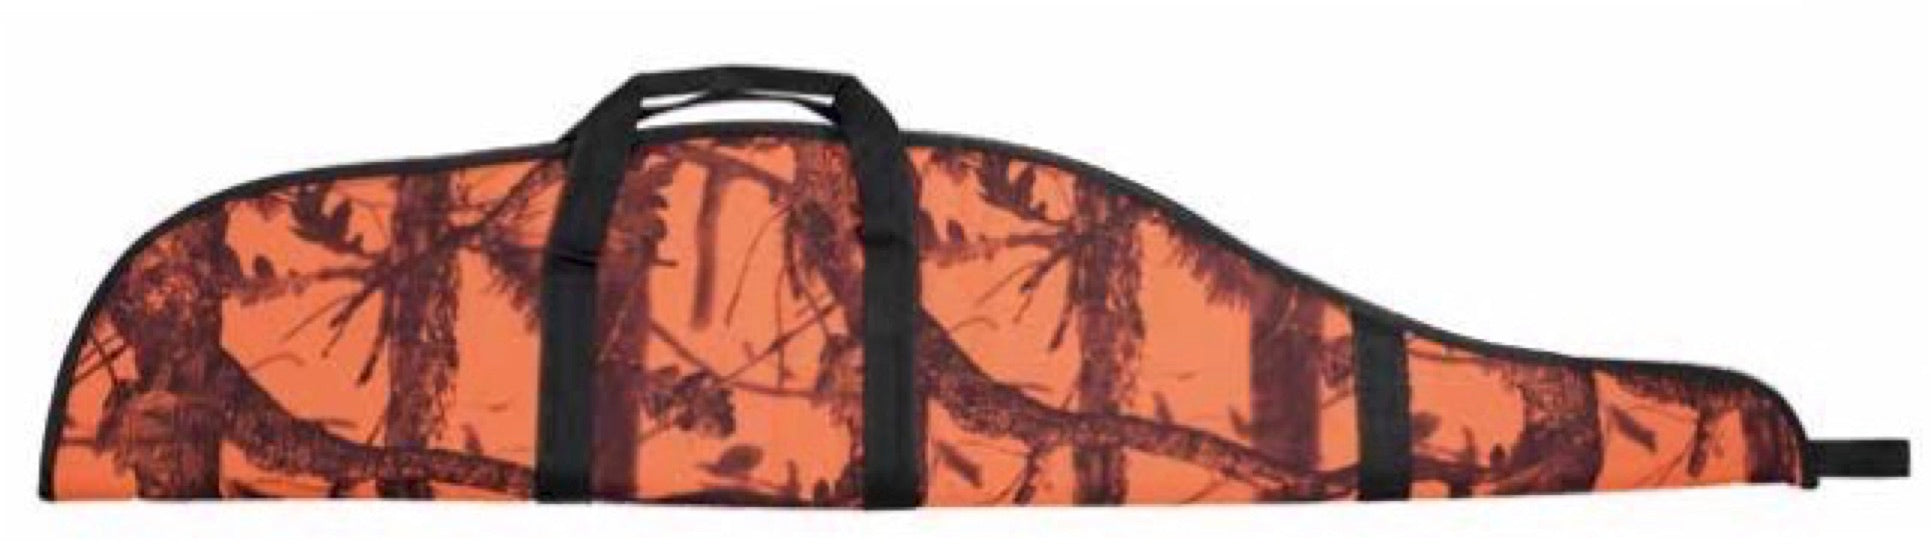 Padded Case for Rifle or Carbine with Scope